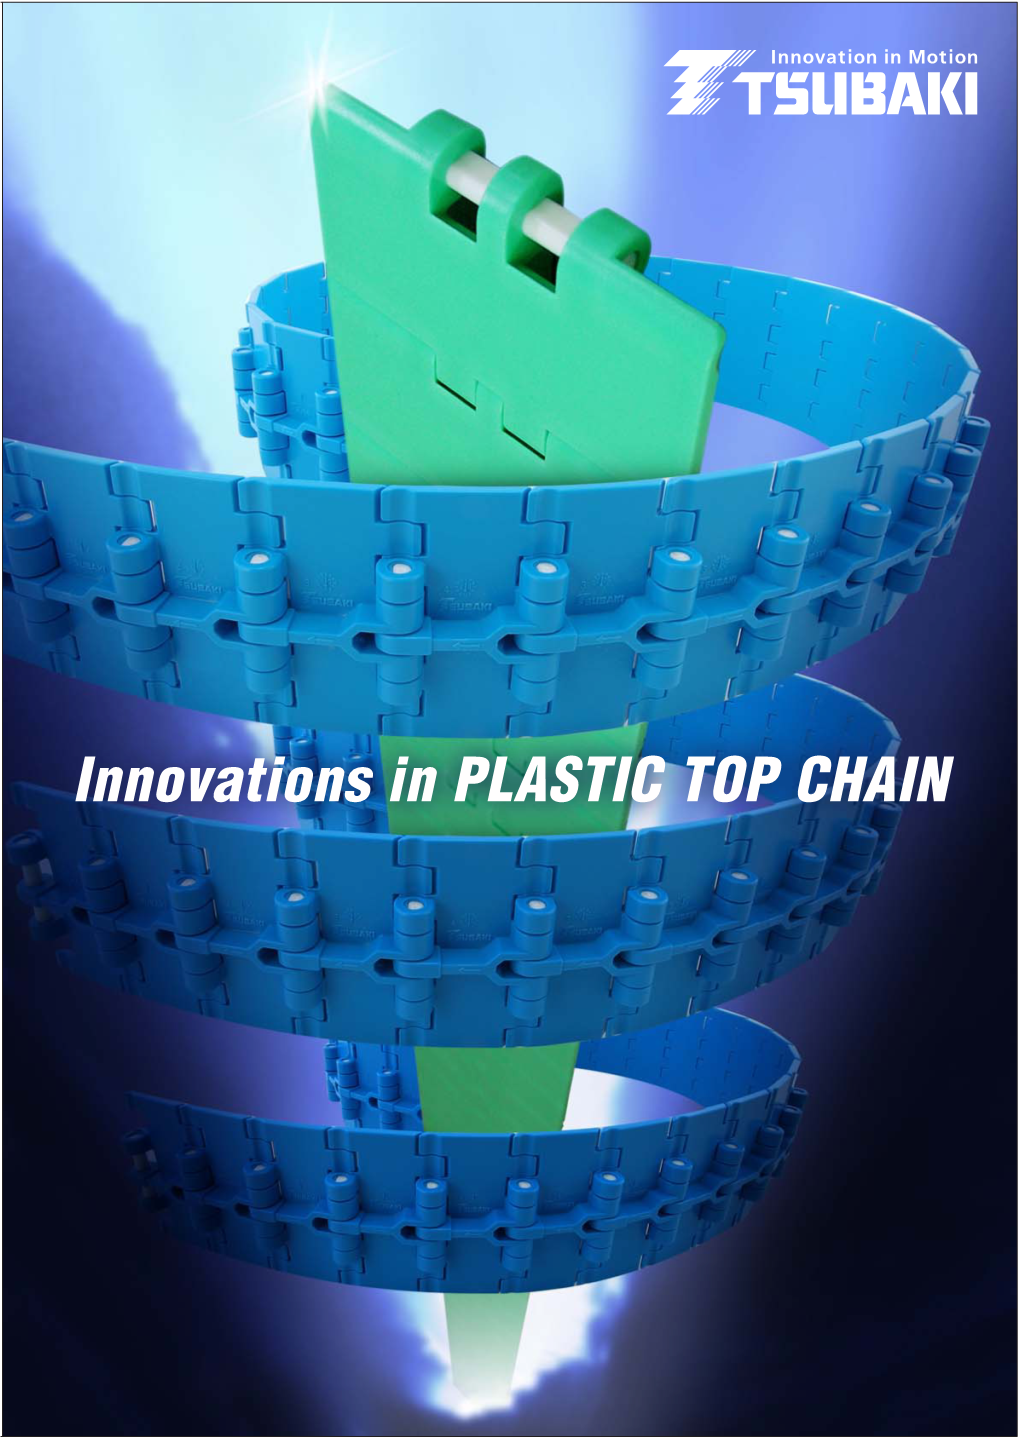 Innovations in PLASTIC TOP CHAIN